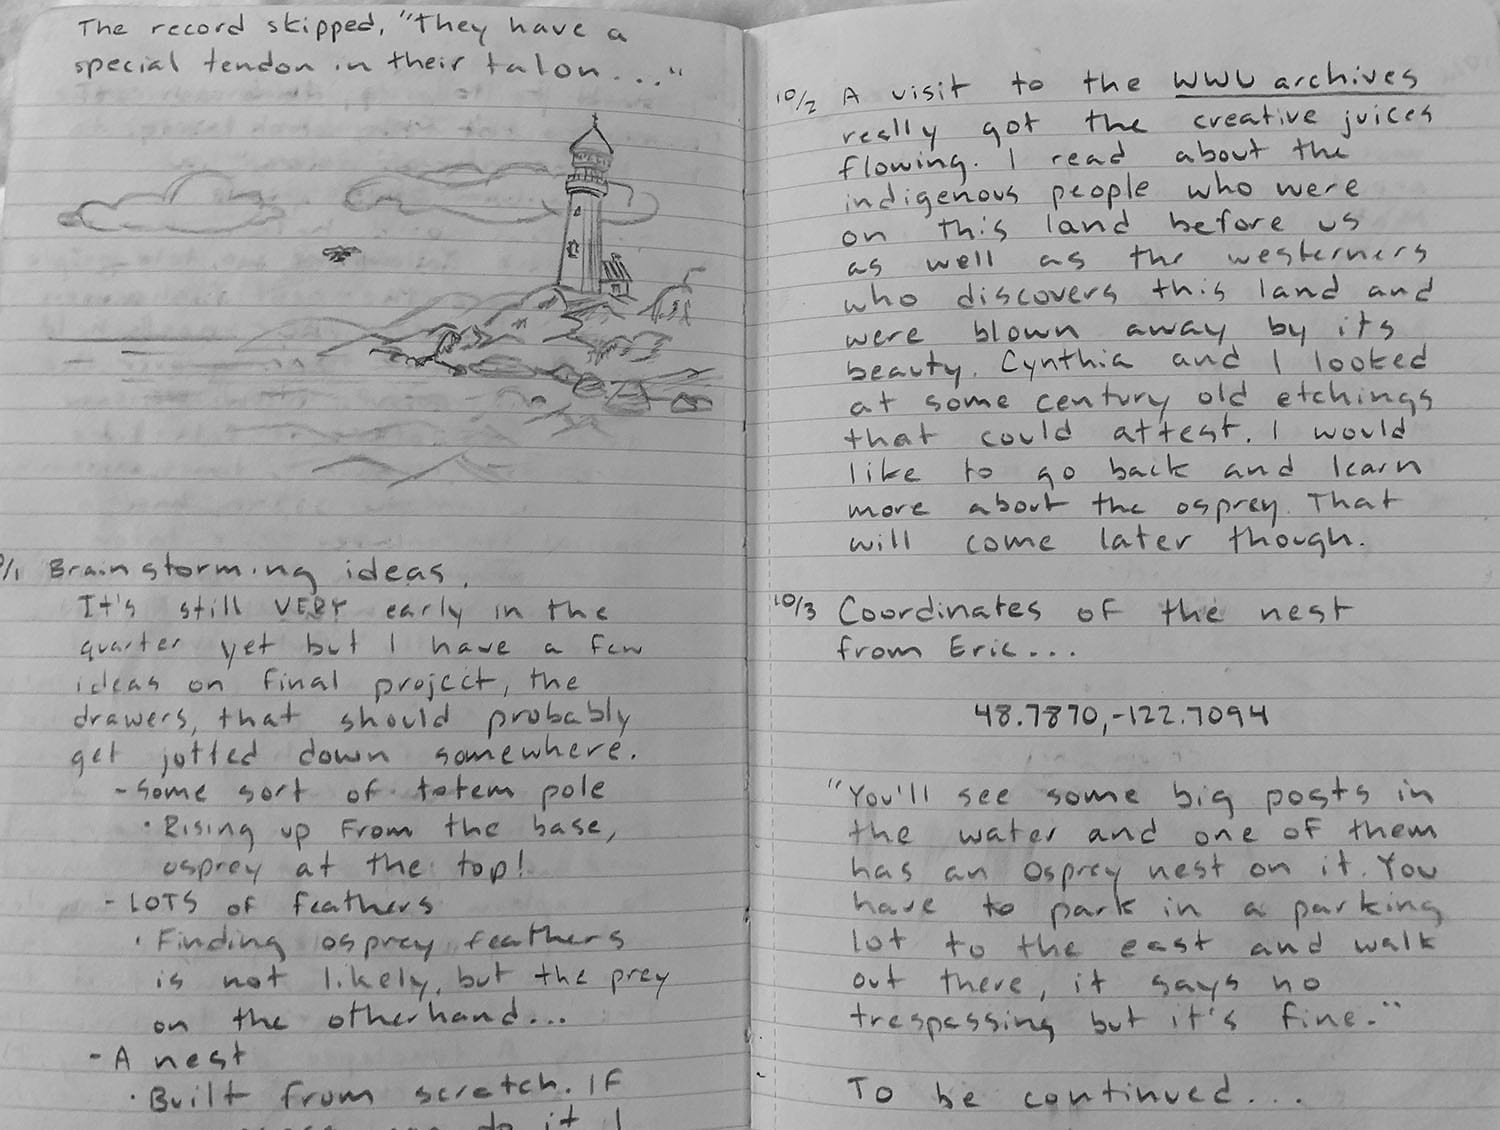 drawing of a lighthouse surrounded by brief journal entries for 3 days of a field trip looking at nests